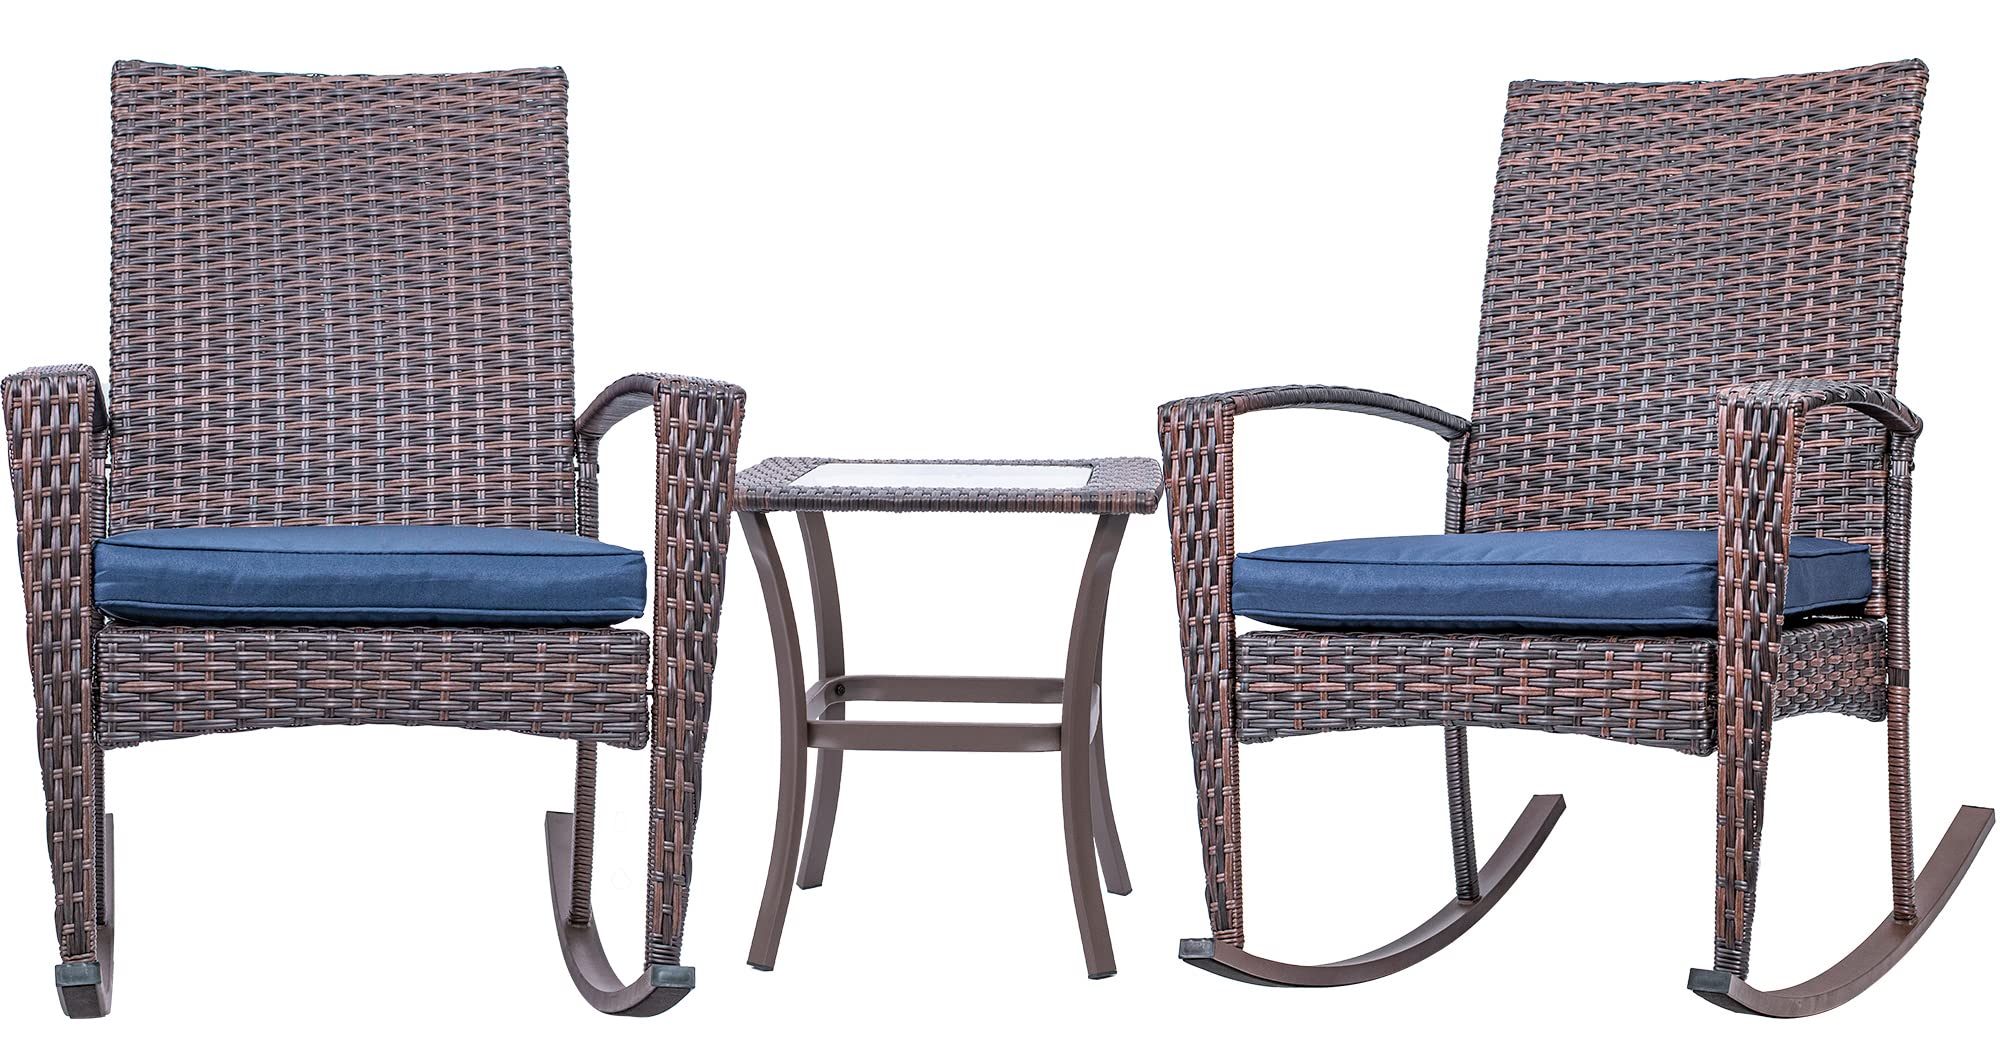 3 Piece Wicker Patio Furniture Sets, Outdoor Wicker Rocking Chairs Patio Bistro Set, Rattan Chairs Patio Furniture Set for Porch Lawn Poolside Backyard with Glass Coffee Table, Brown and Navy